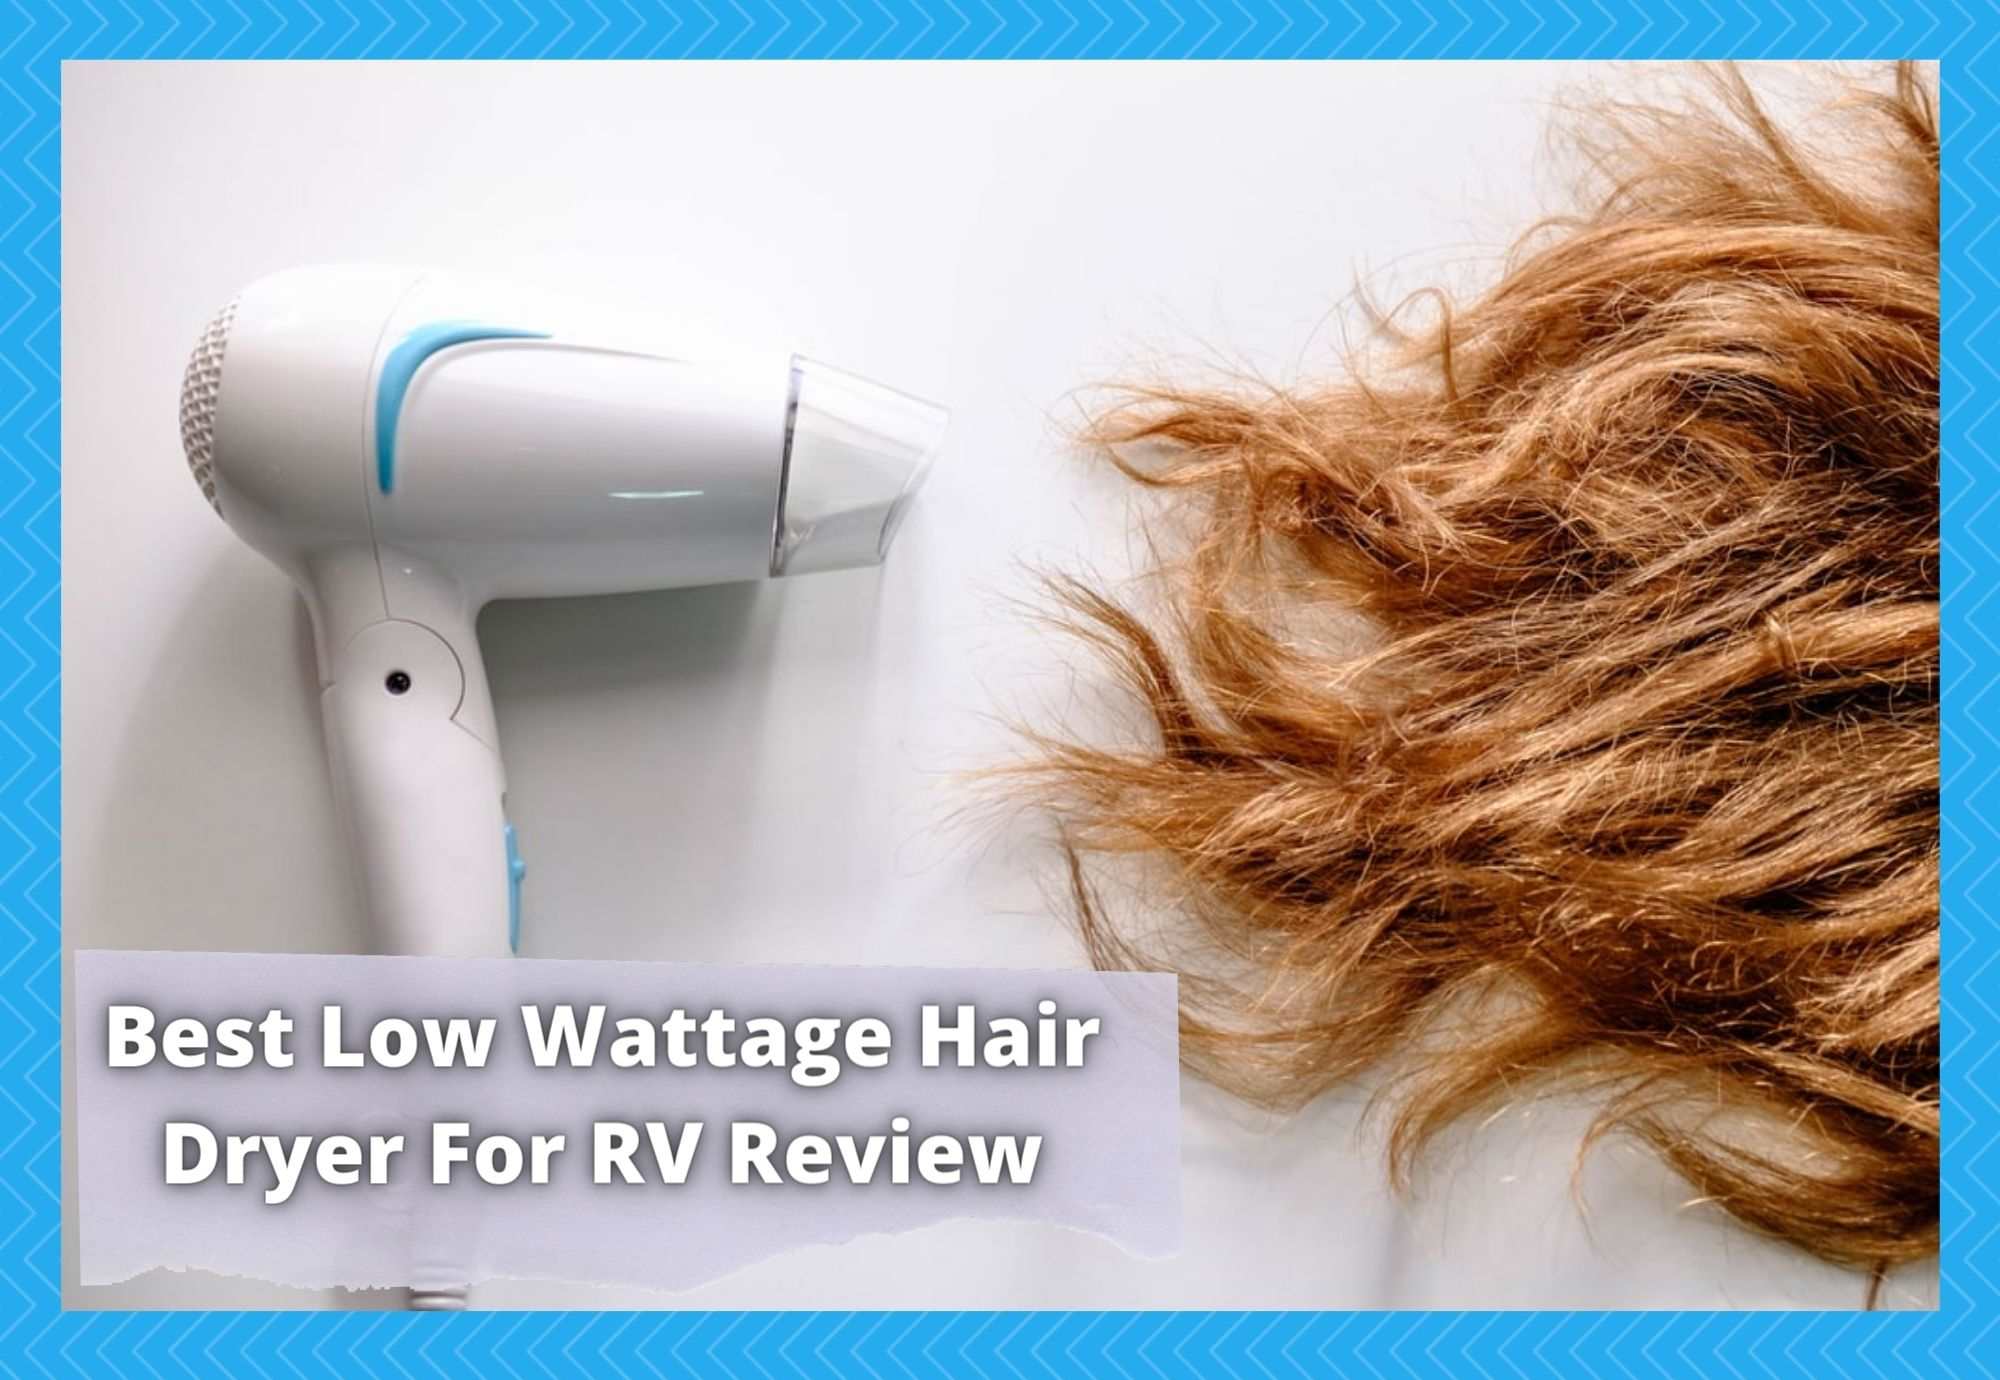 3 Best Low Wattage Hair Dryer For RV Review 2022 - Camper Upgrade